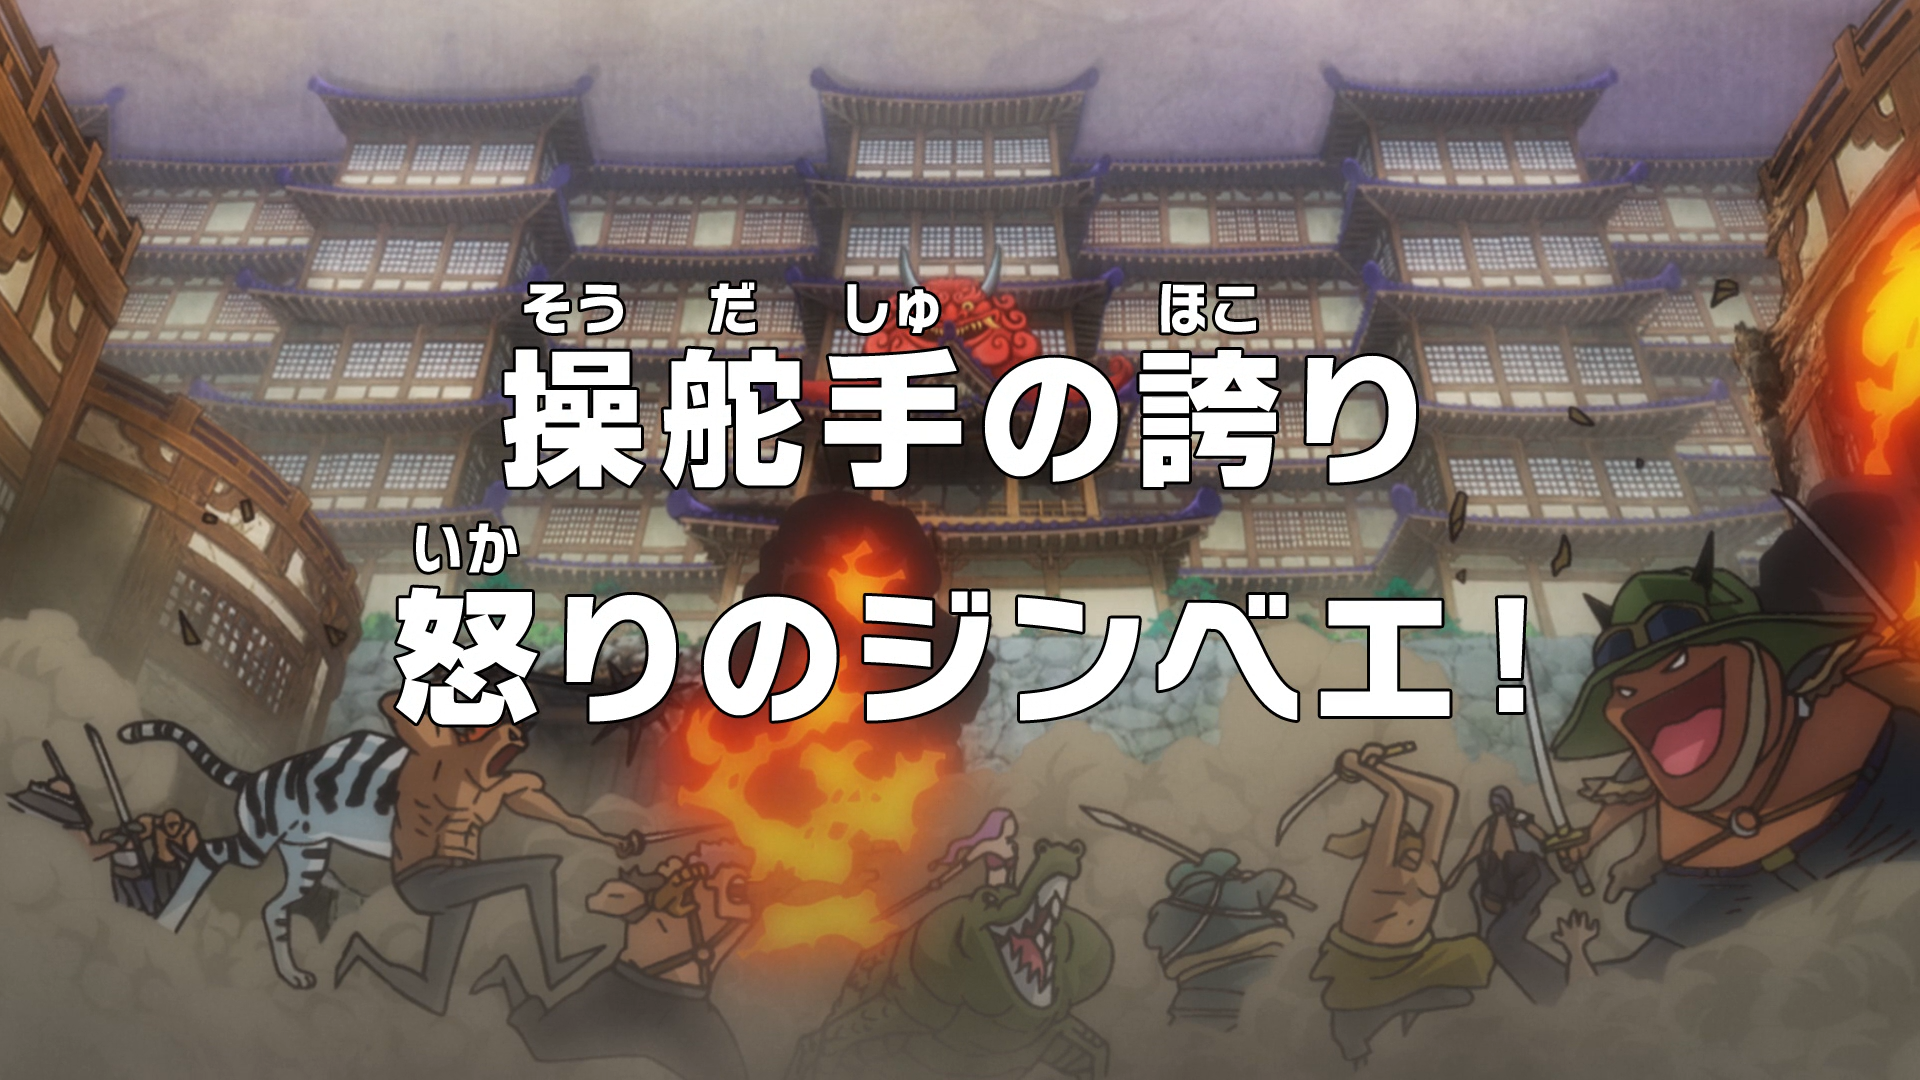 One Piece Episode 1037 Episode Guide – Release Date, Times & More